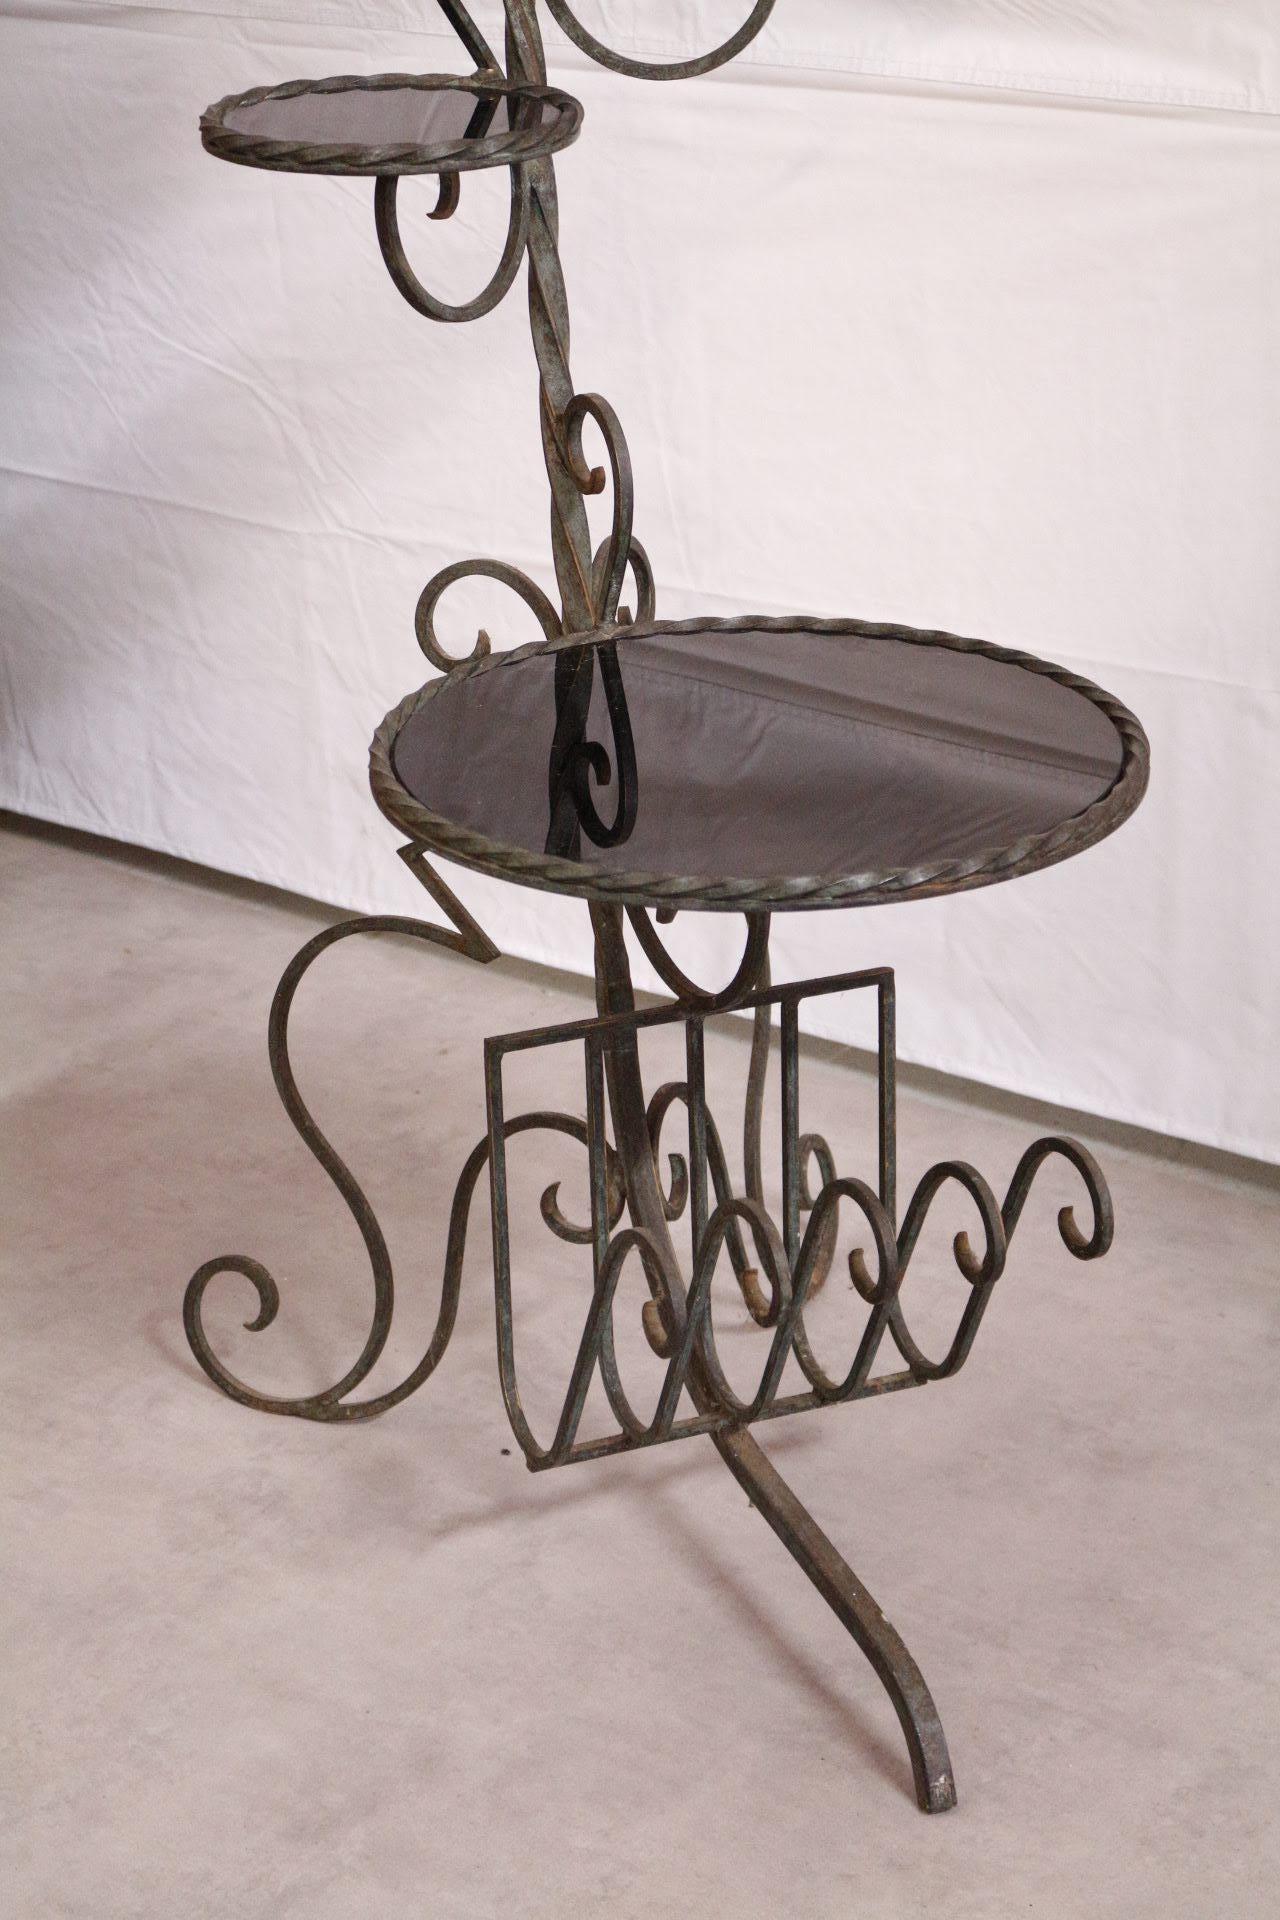 Midcentury floor lamp French wrought iron black glass plant Stand magazine rack
Shown with original shade
This can be re-wired and tested to USA or European standards.